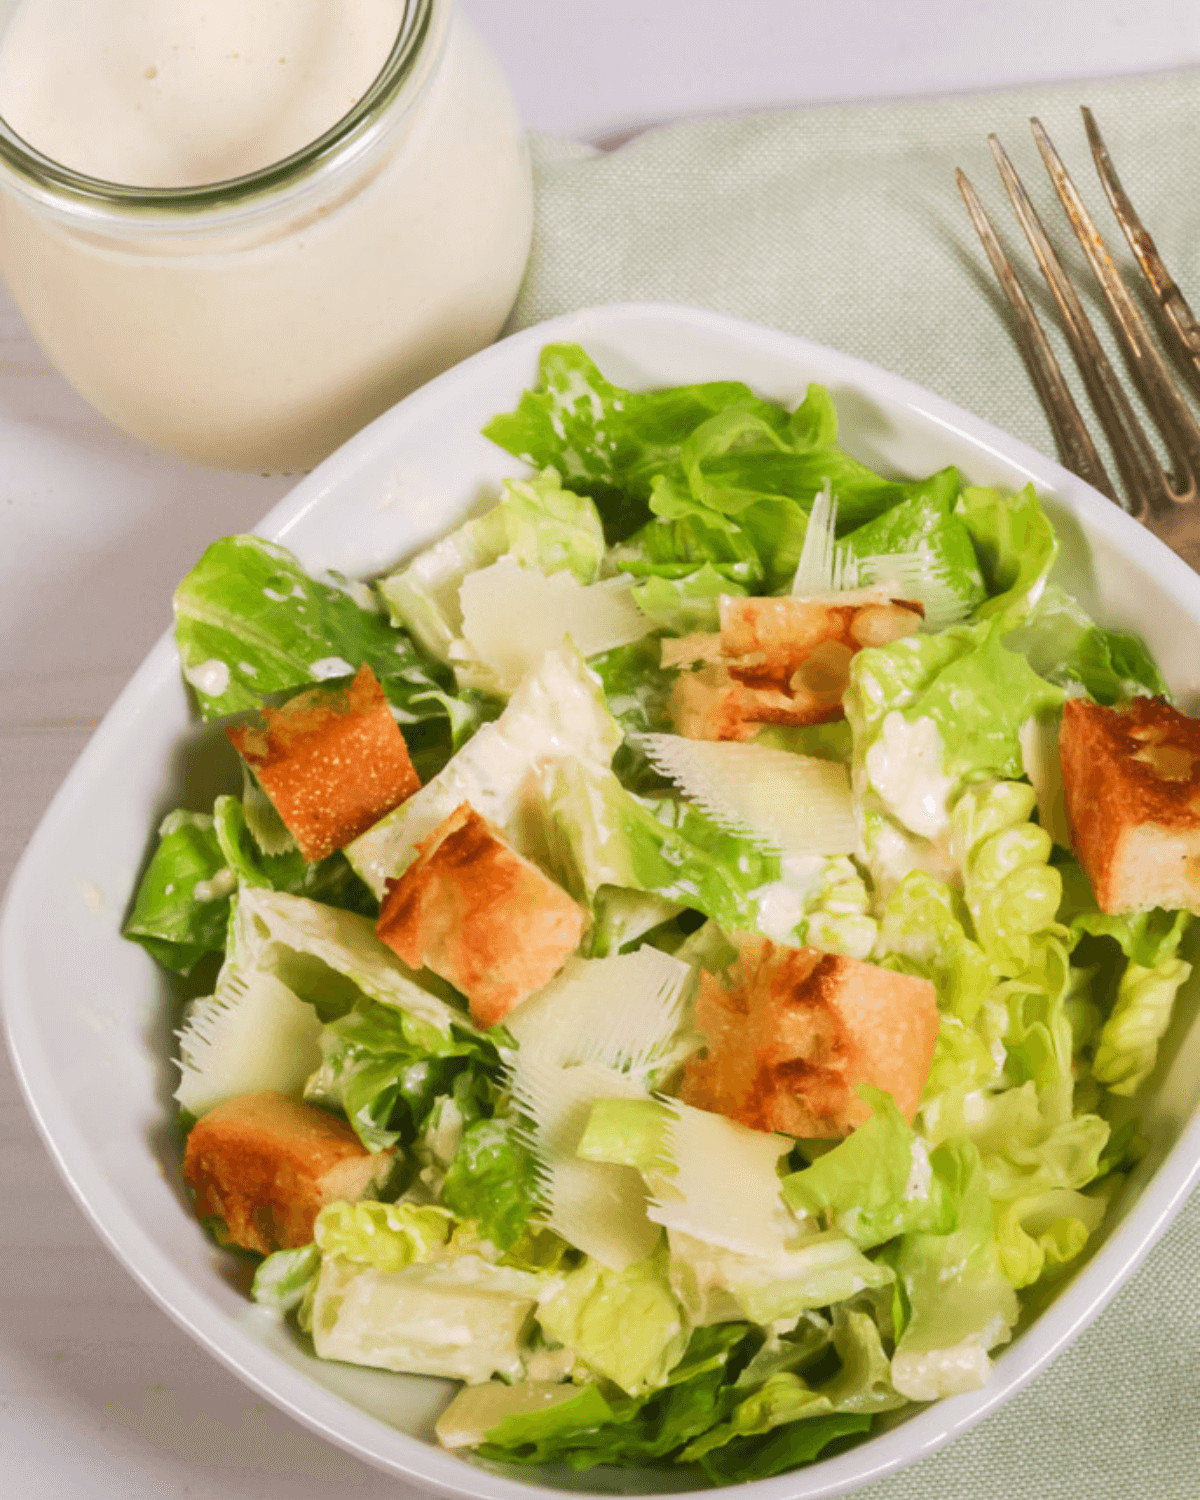 A fresh best caesar salad with croutons and shaved parmesan cheese, accompanied by a jar of dressing.